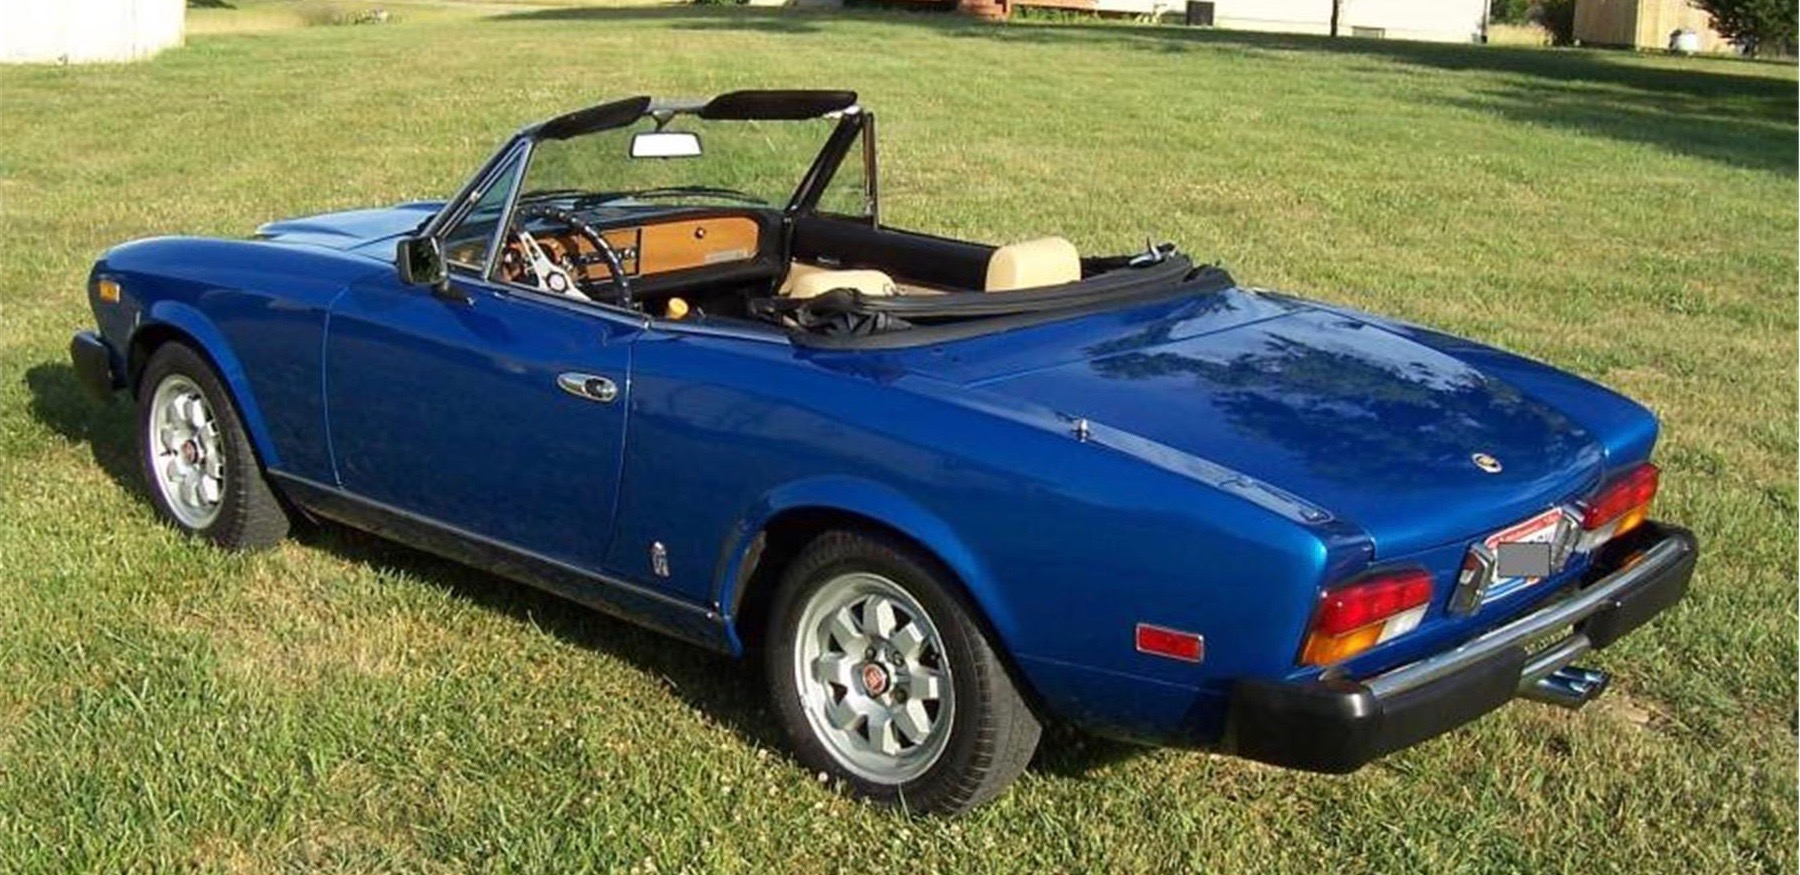 Fiat 2000 Spider, 1980 Fiat 2000 Spider offered with many updated parts, ClassicCars.com Journal